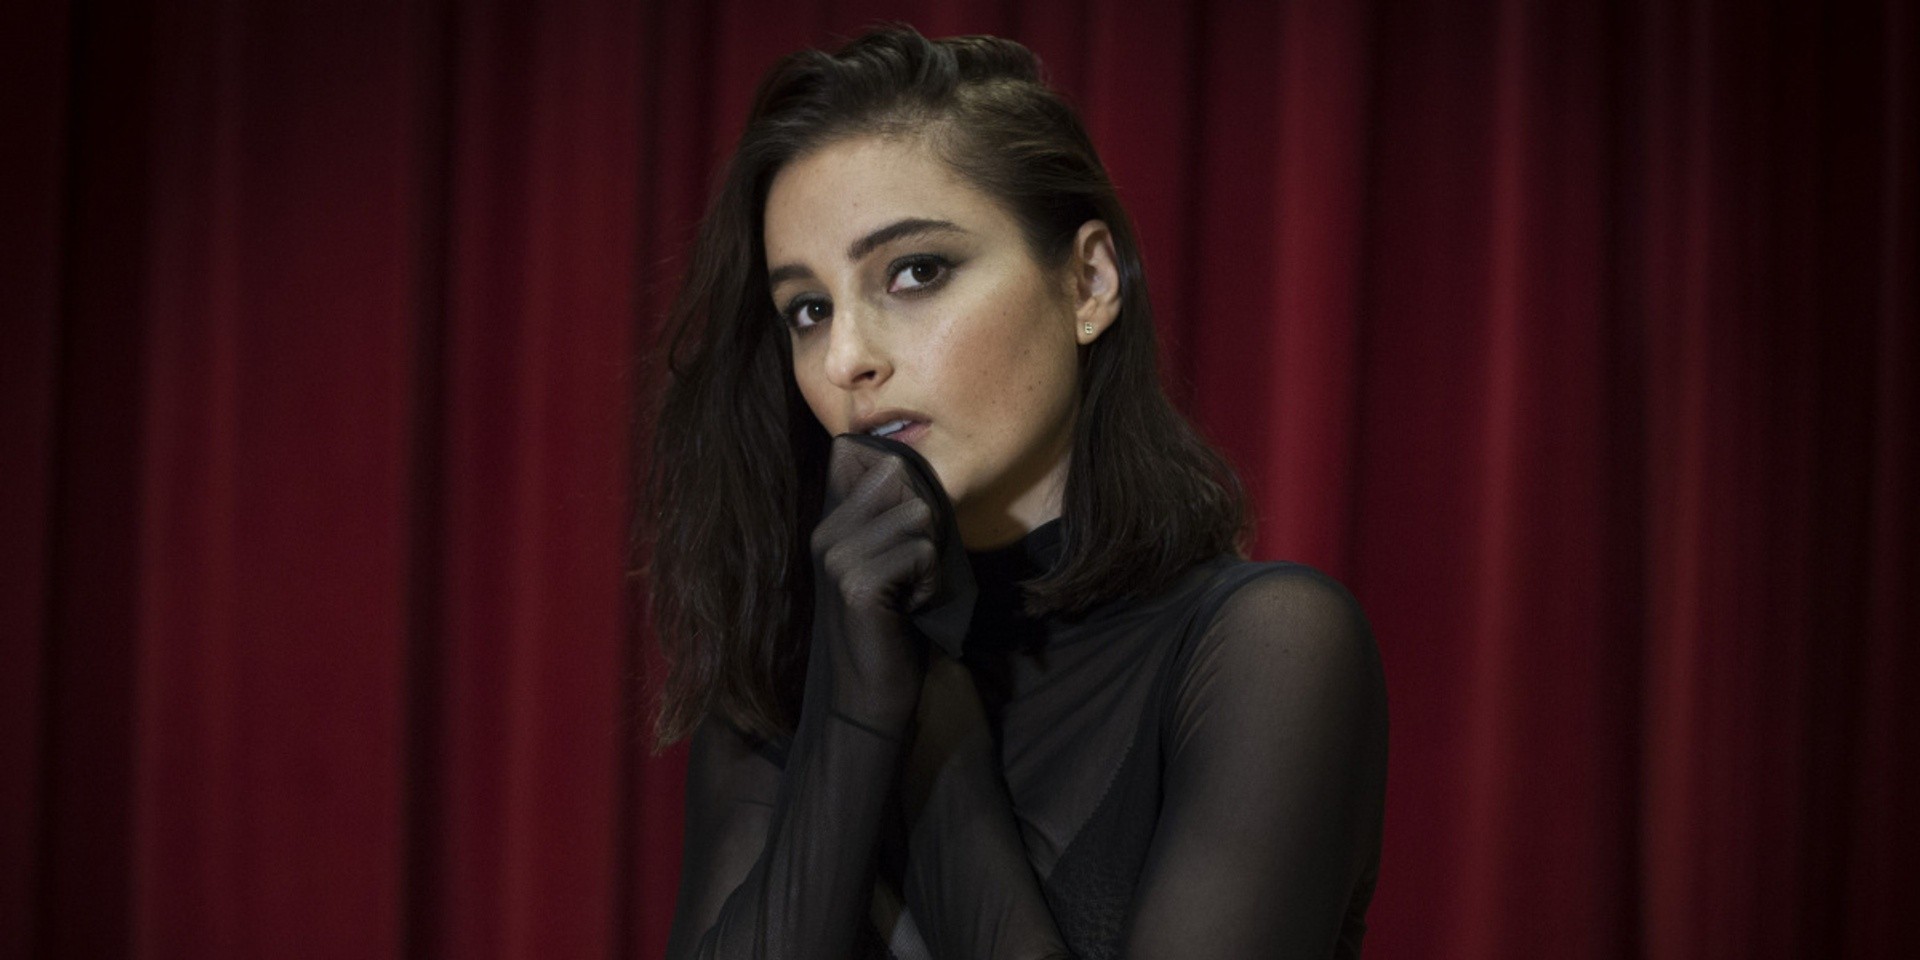 Banks releases brooding new song, ‘Contaminated’ – listen